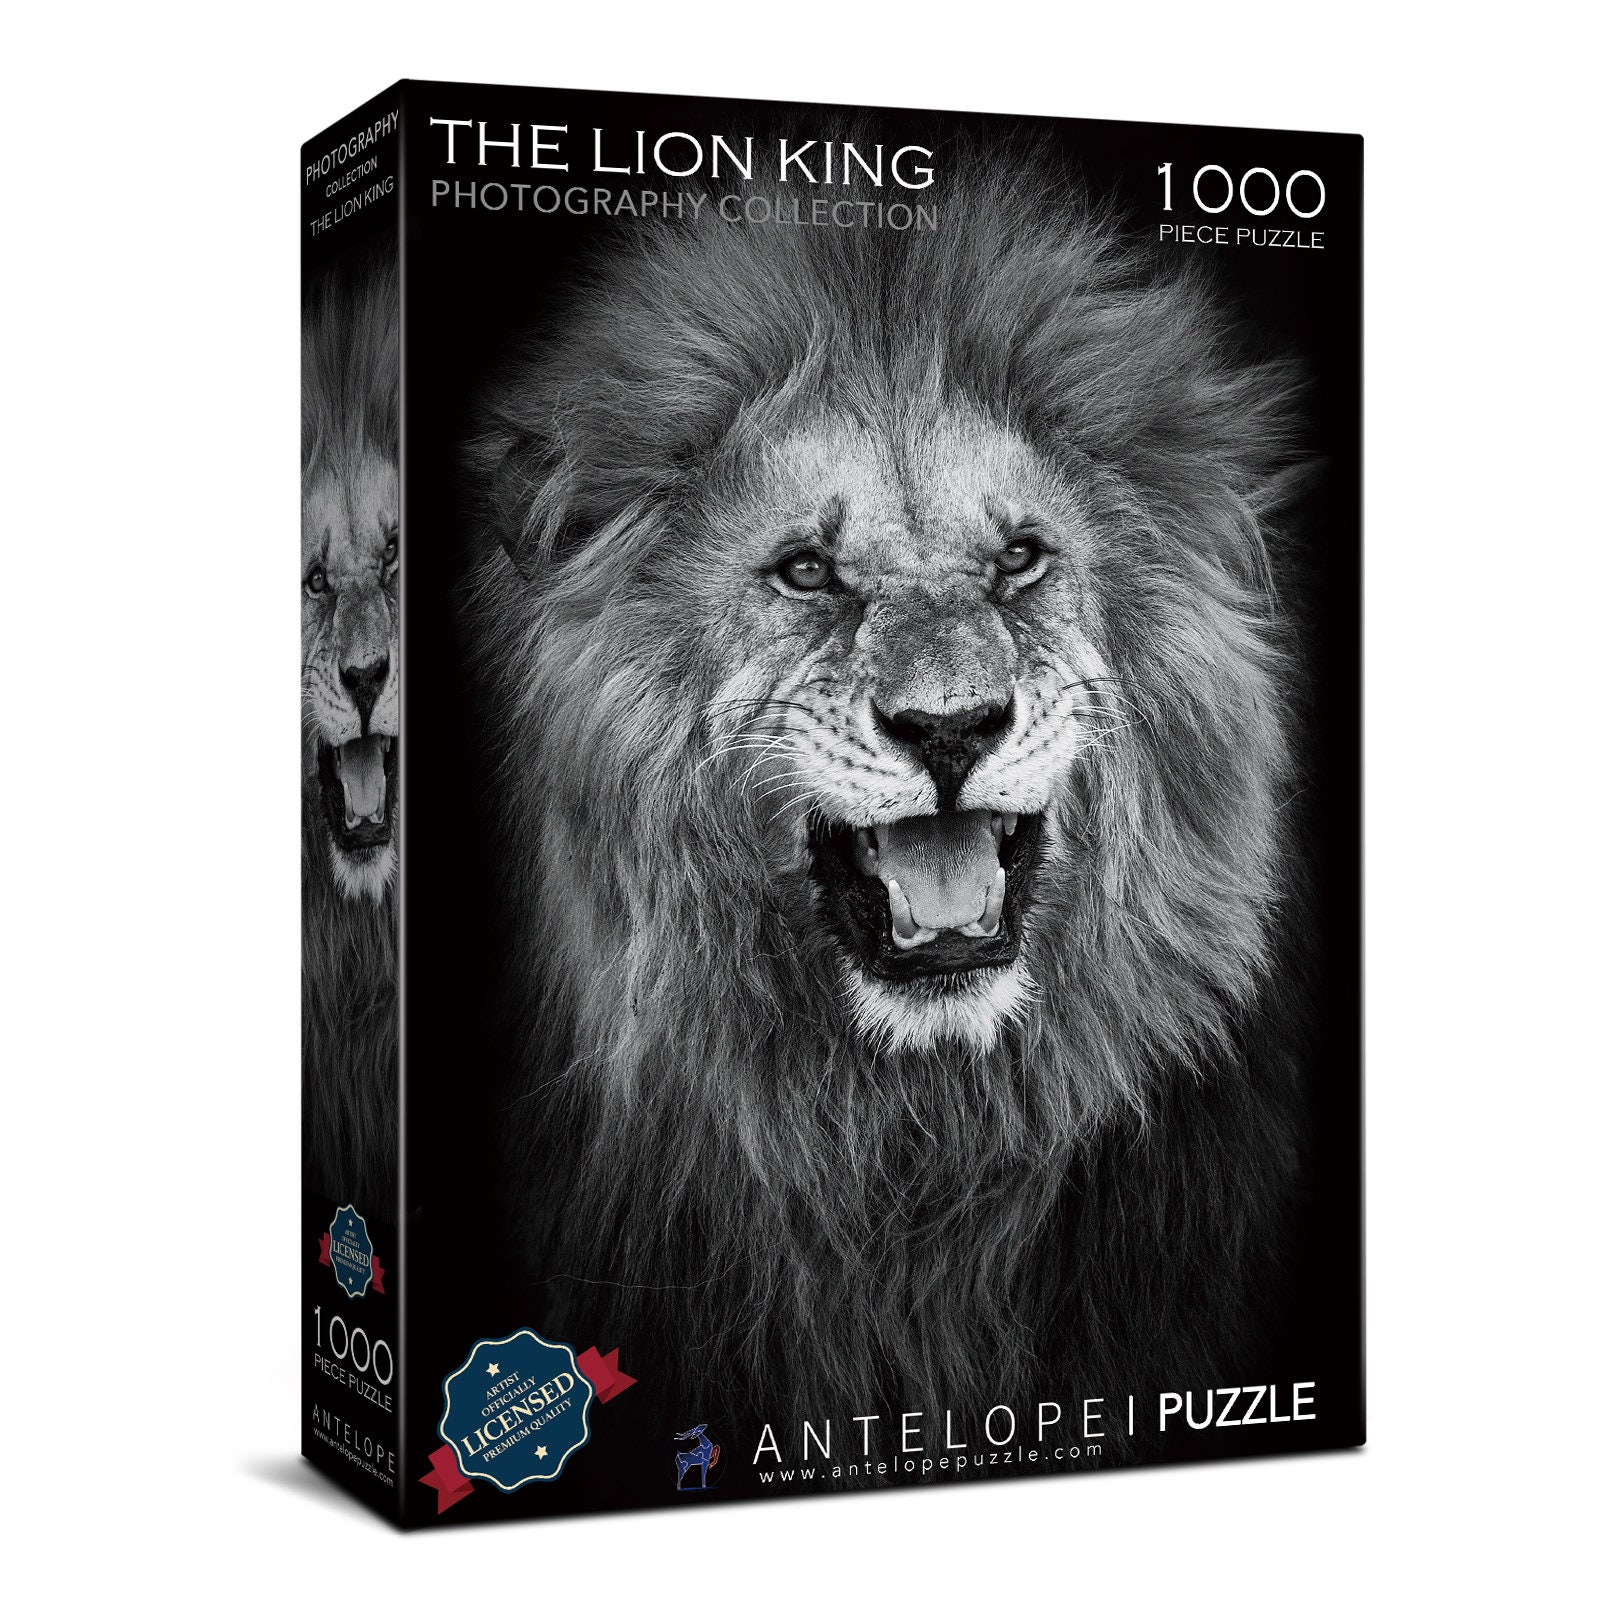 Antelope the Lion King Jigsaw Puzzle by Linxiang Qin, 1000 Pieces, 29.5 X  20.5, Jigsaw Puzzle With Close-up Photo of the Ling King 